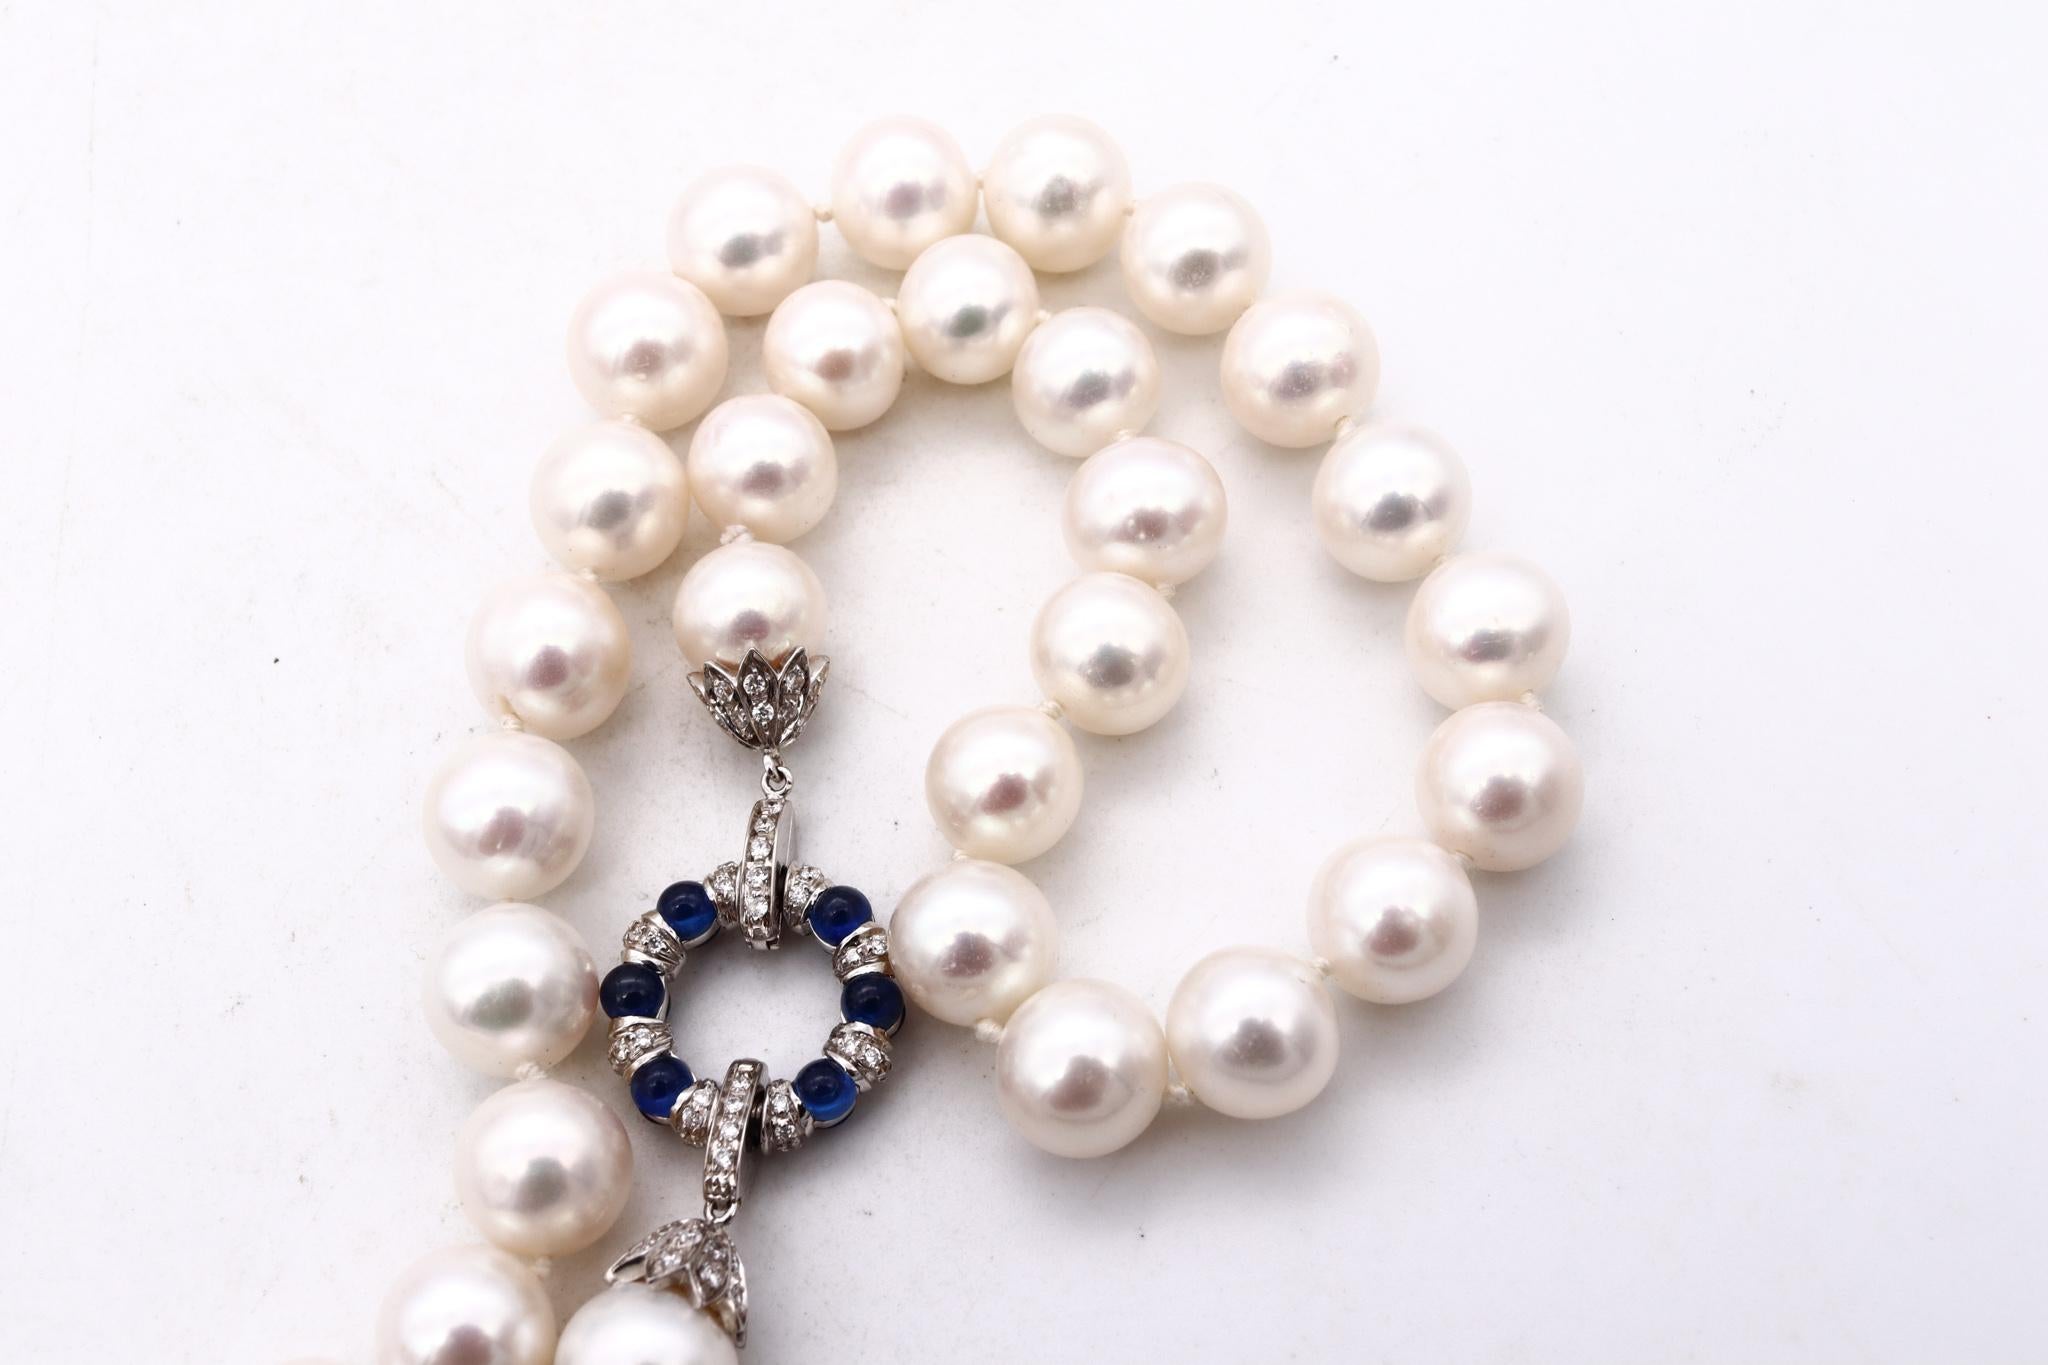 Modernist Favero Italy 18Kt Gold Necklace Akoya Pearls and 4.74 Cts in Sapphire Diamonds